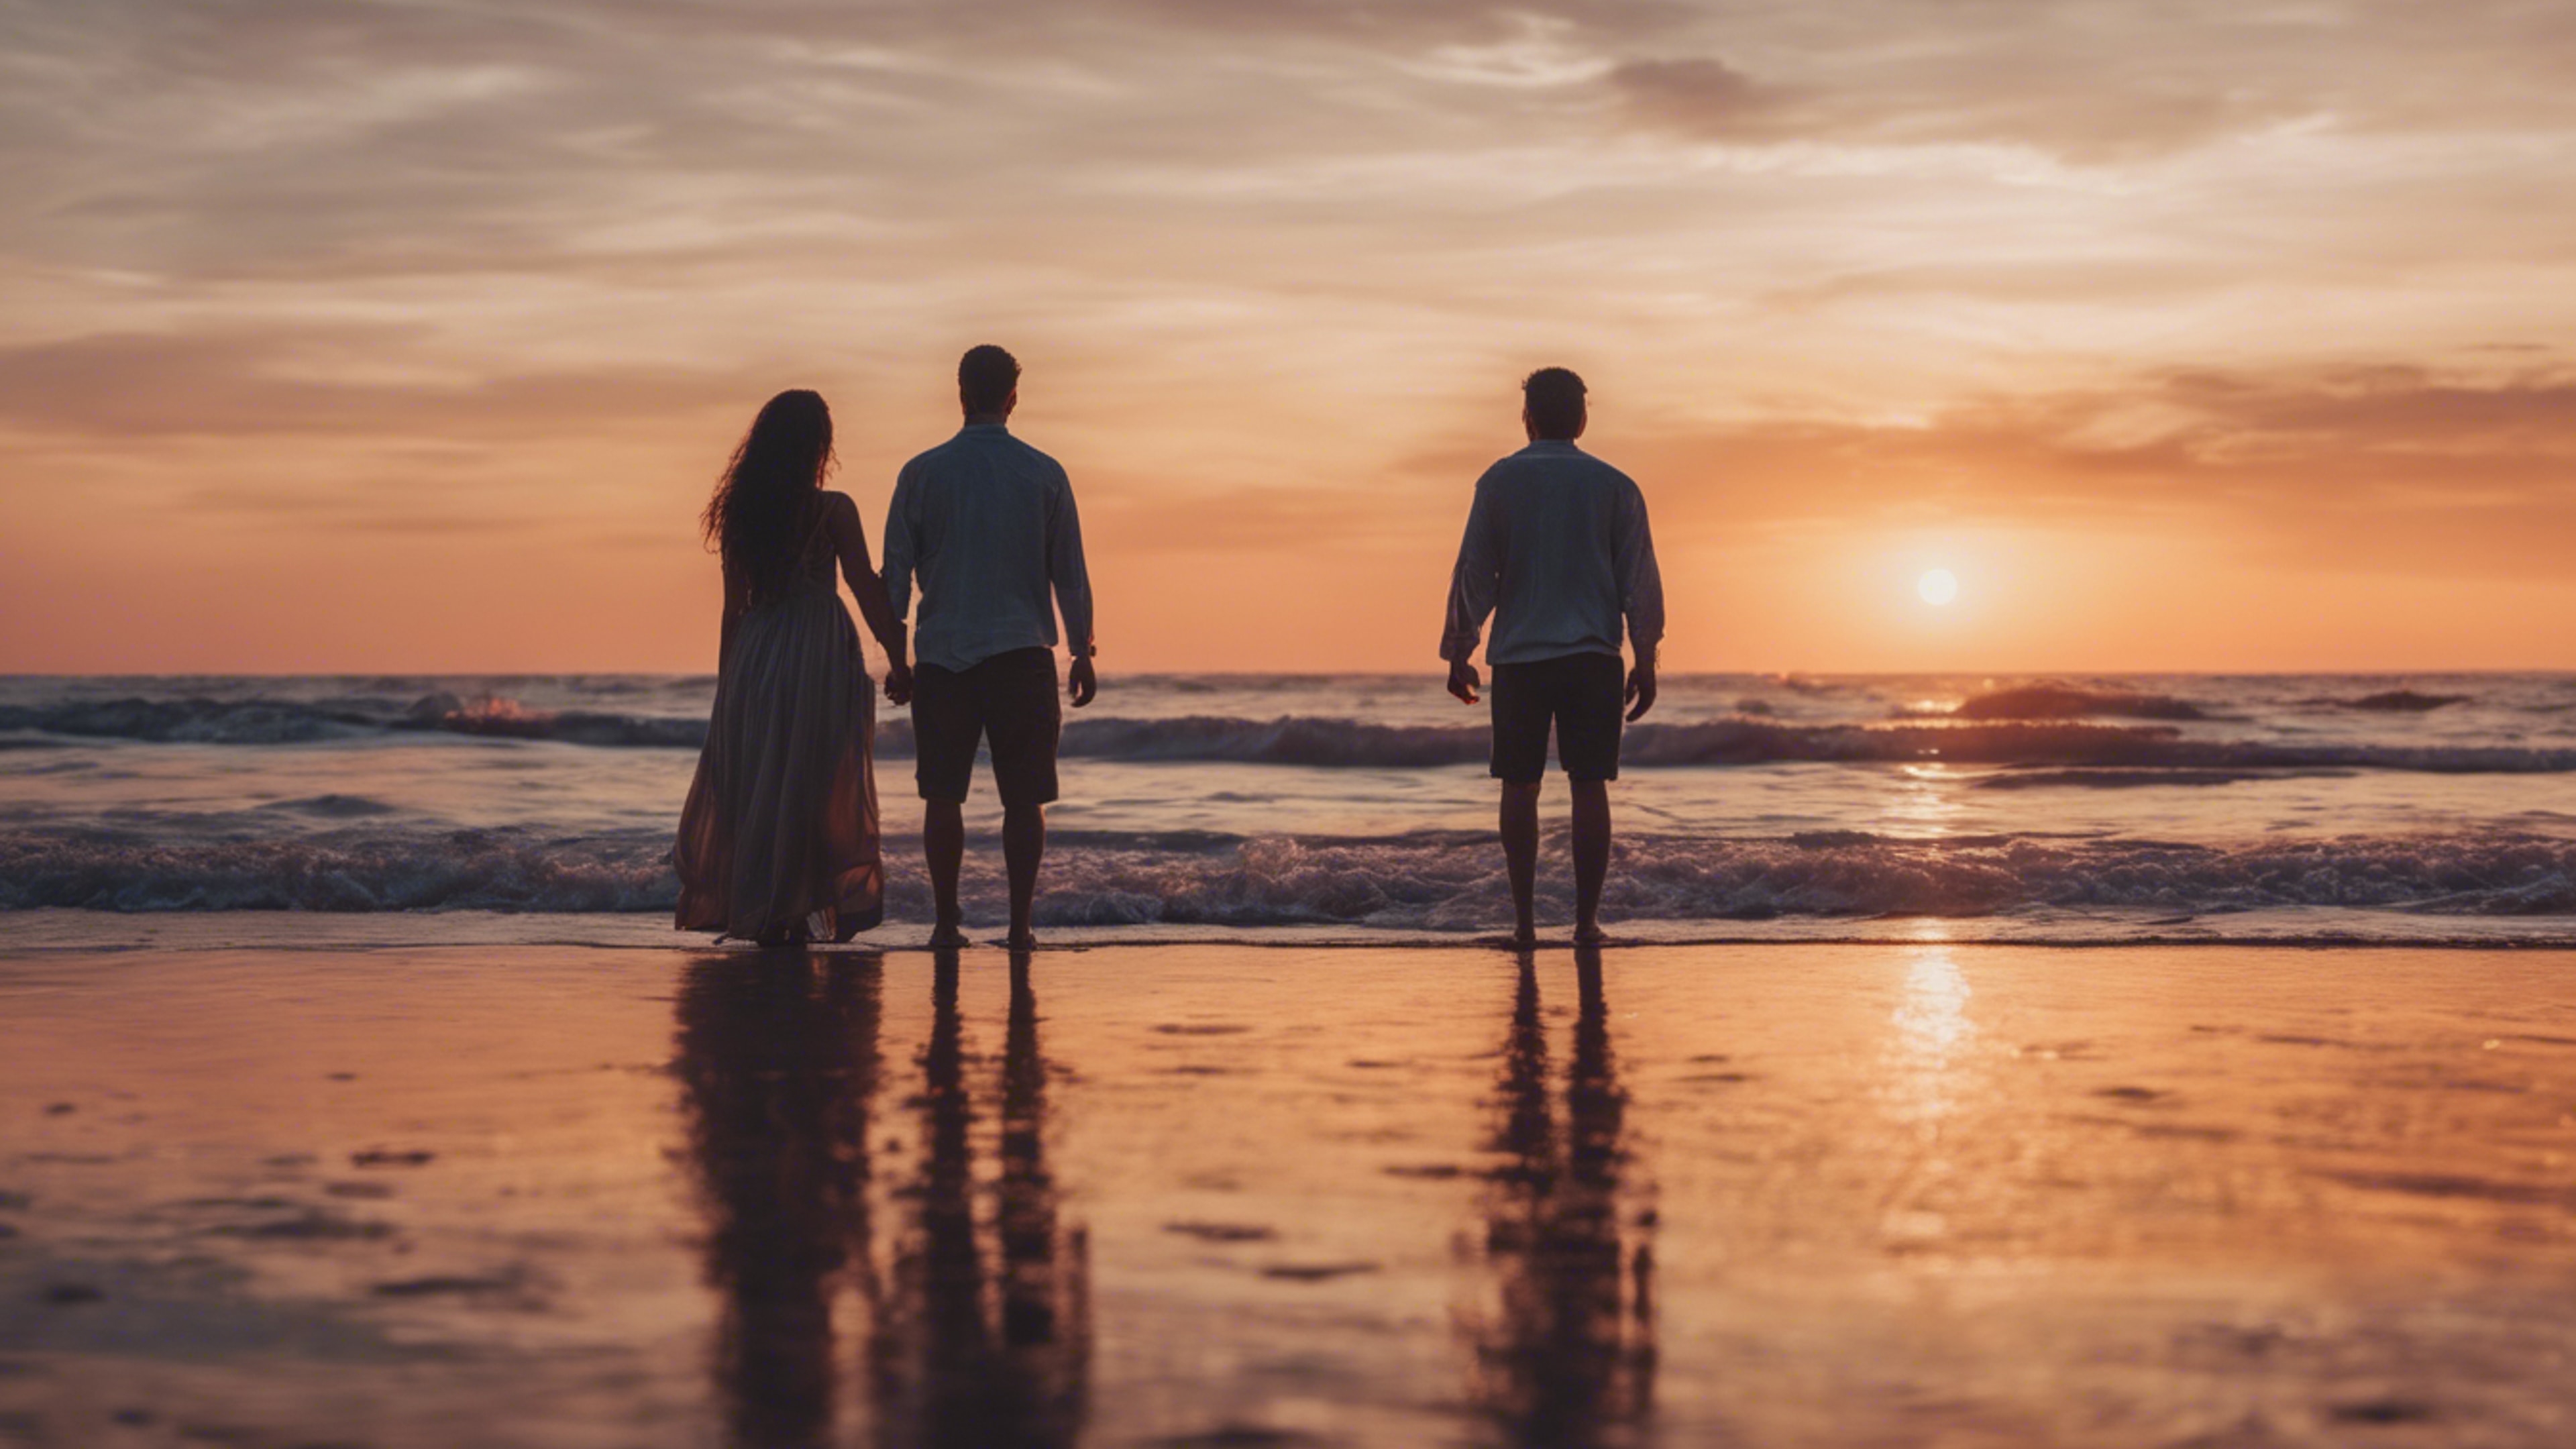 A romantic couple enjoying the spectacular display of colors during a beach sunset. Wallpaper[bcd9a5c076c24be7944c]